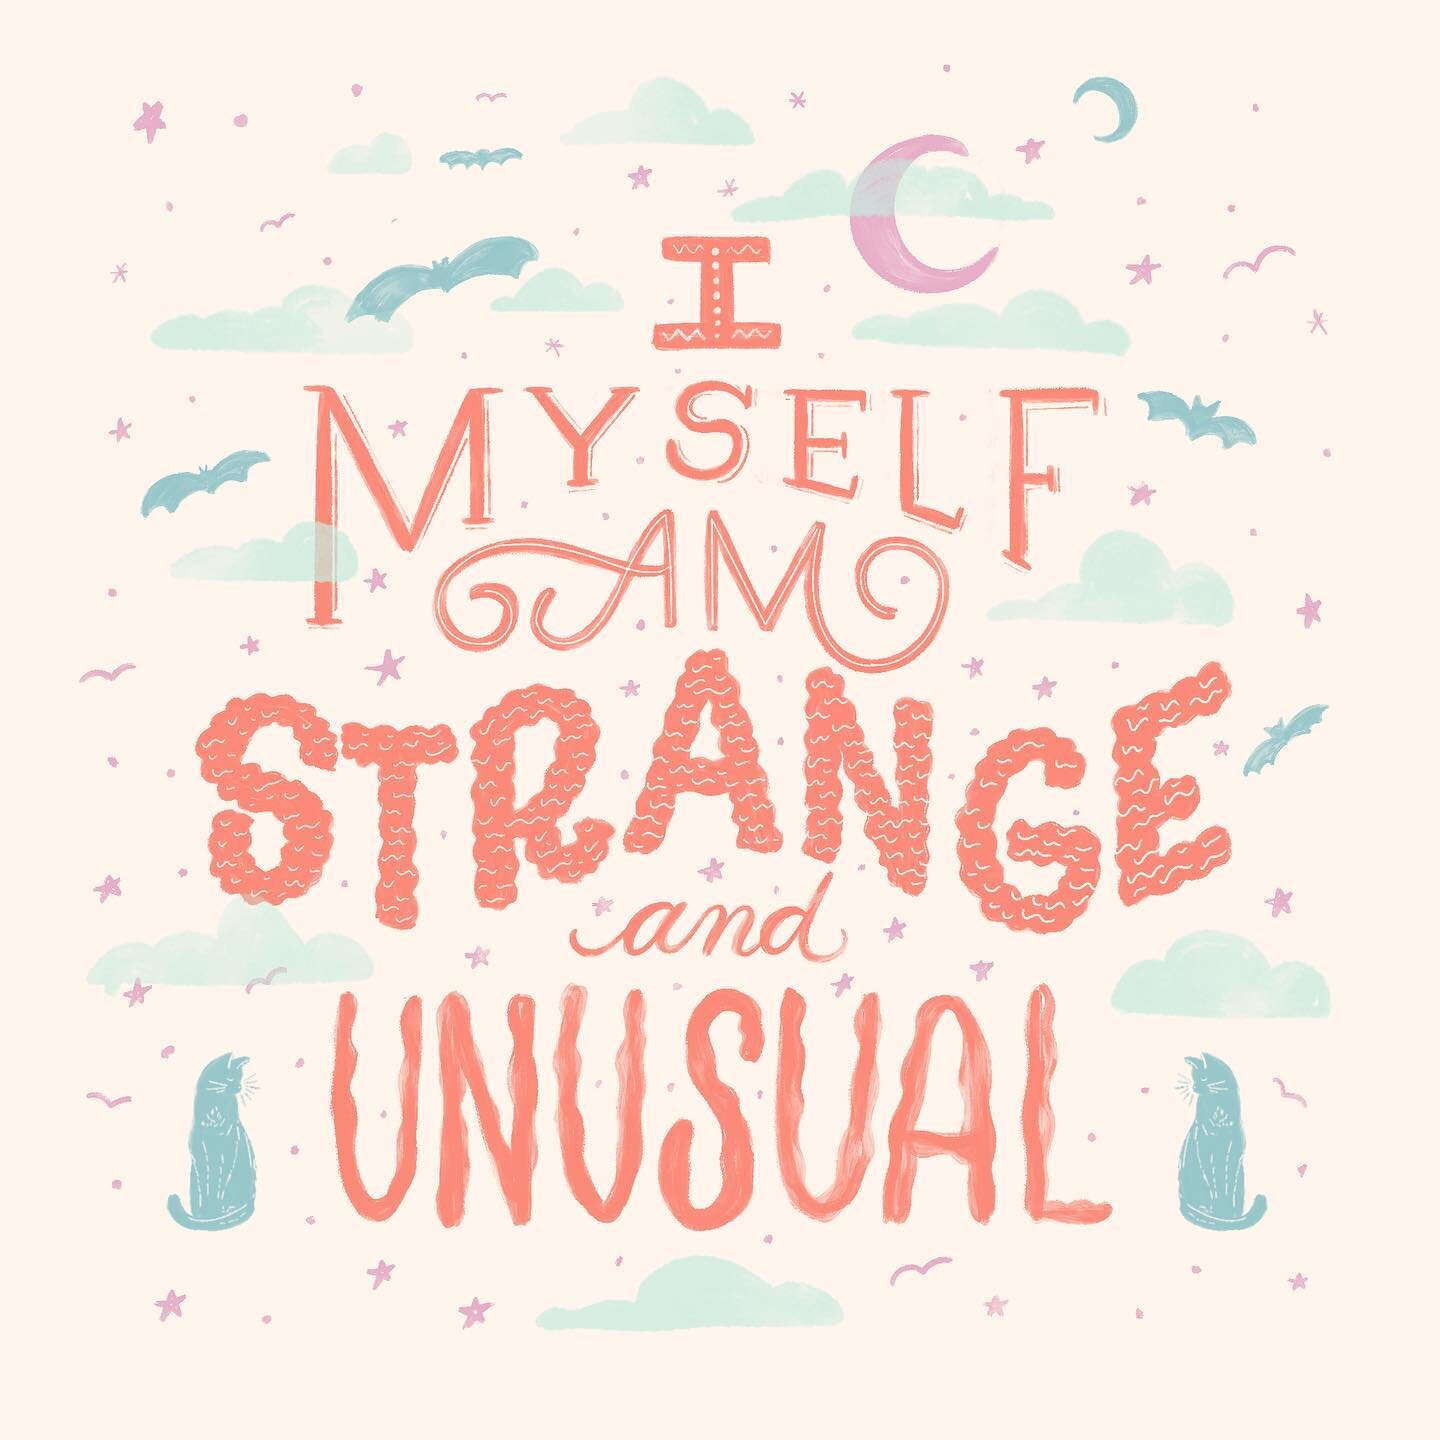 While this halloween is a bummer for those of us who celebrate the #spookyseason I really do have a lot of hope for next year. Until then, stay spooky, strange, and unusual my friends! 👻🎃🧡🔮🖤☠️🧛&zwj;♀️🧟&zwj;♀️
.
.
.
.
.
#halloweenquotes #minted